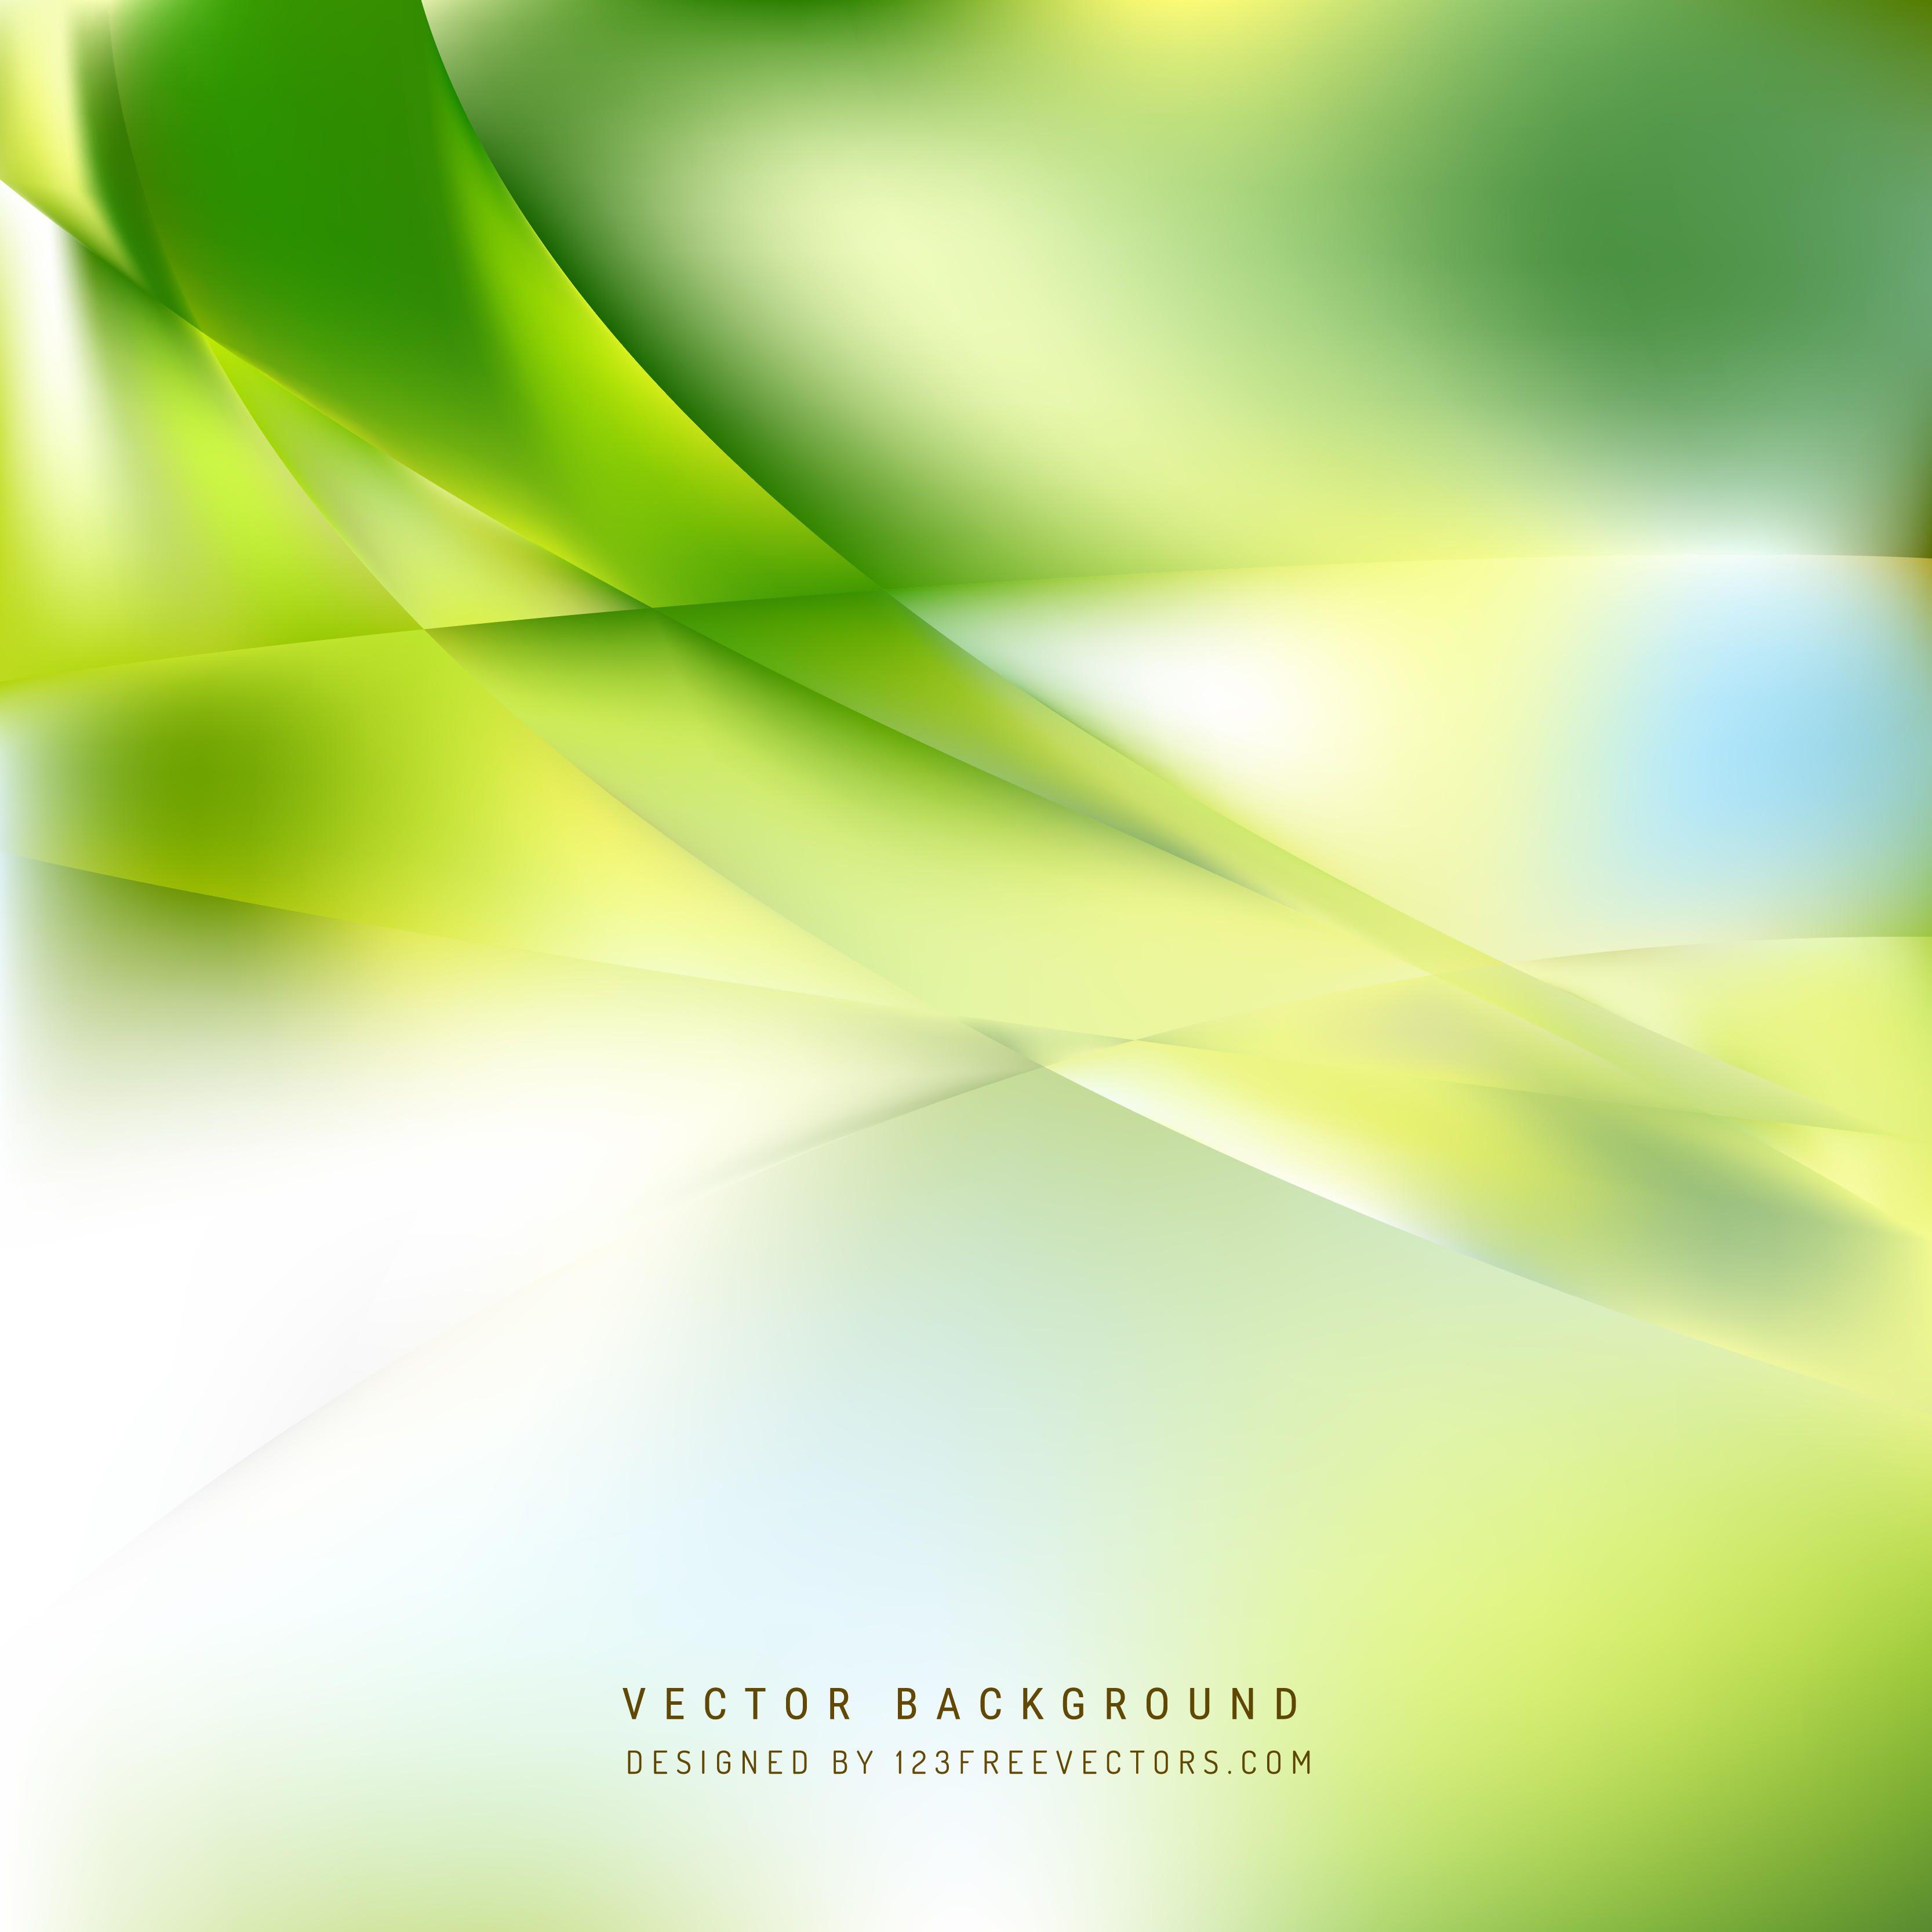 Green and Yellow Background Vectors. Download Free Vector Art